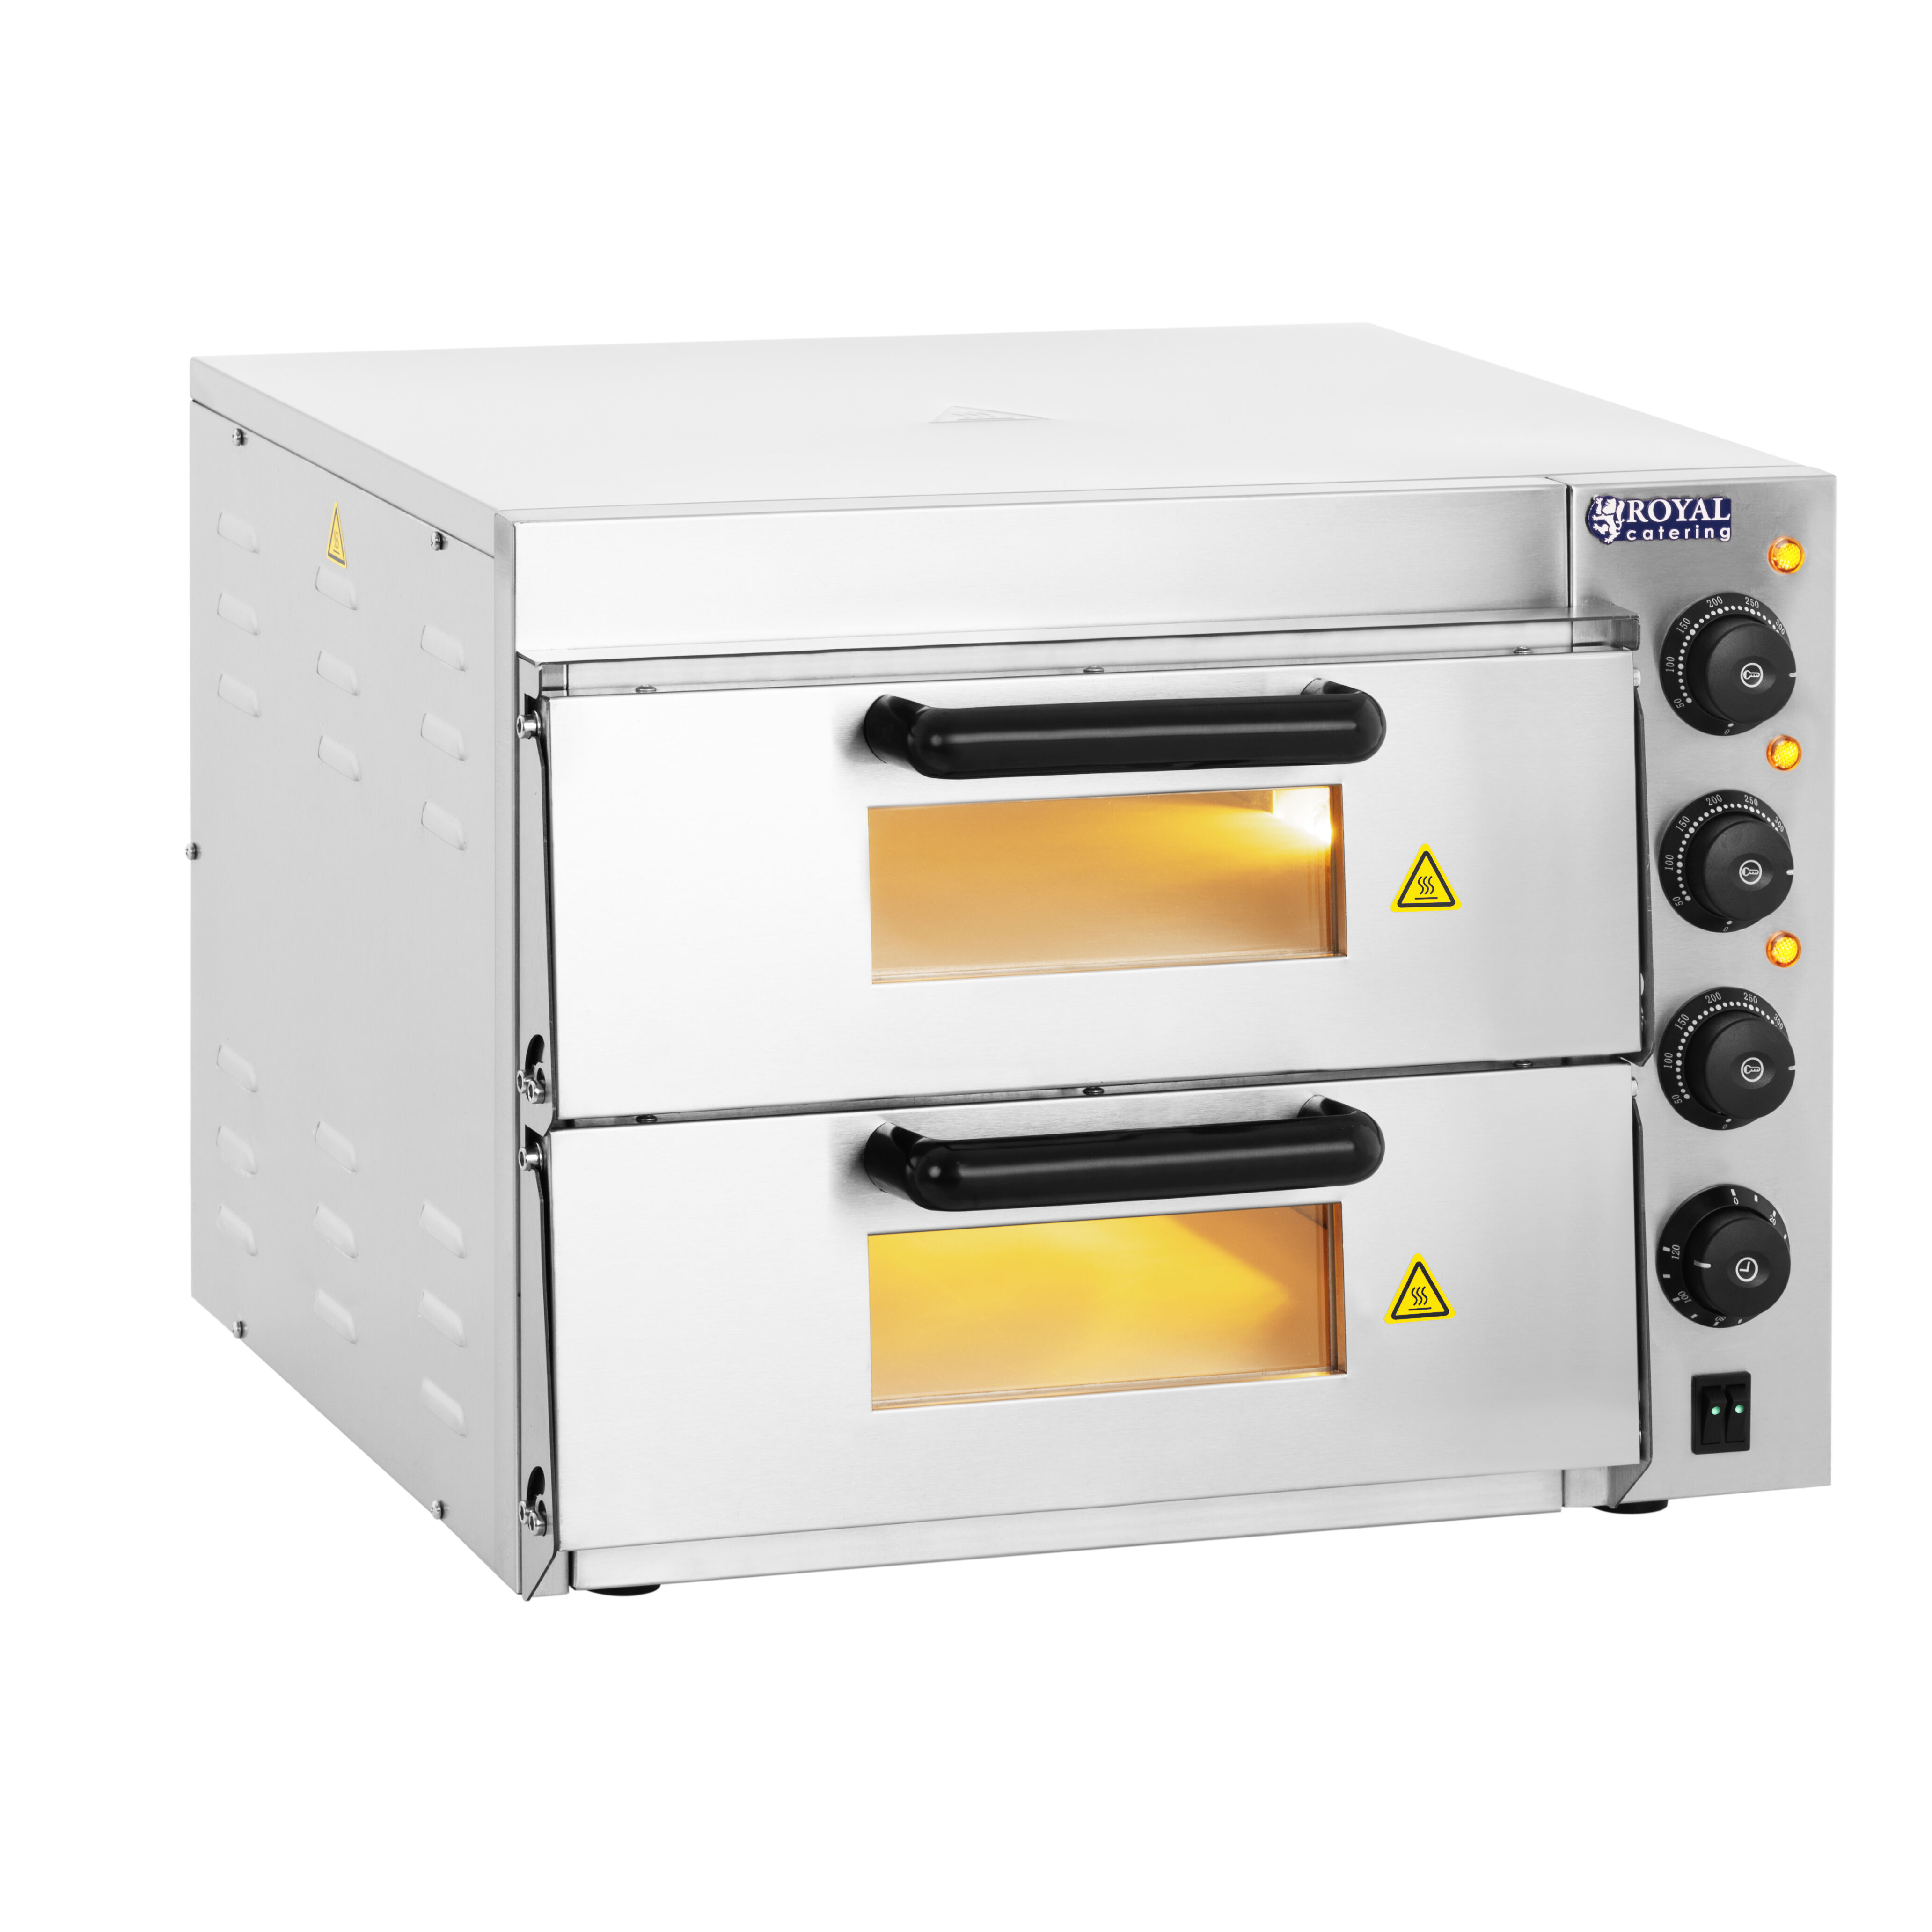 Royal Catering Pizza oven - 2 kamers - Chamotte bodem RCPO-3000-2PS-1